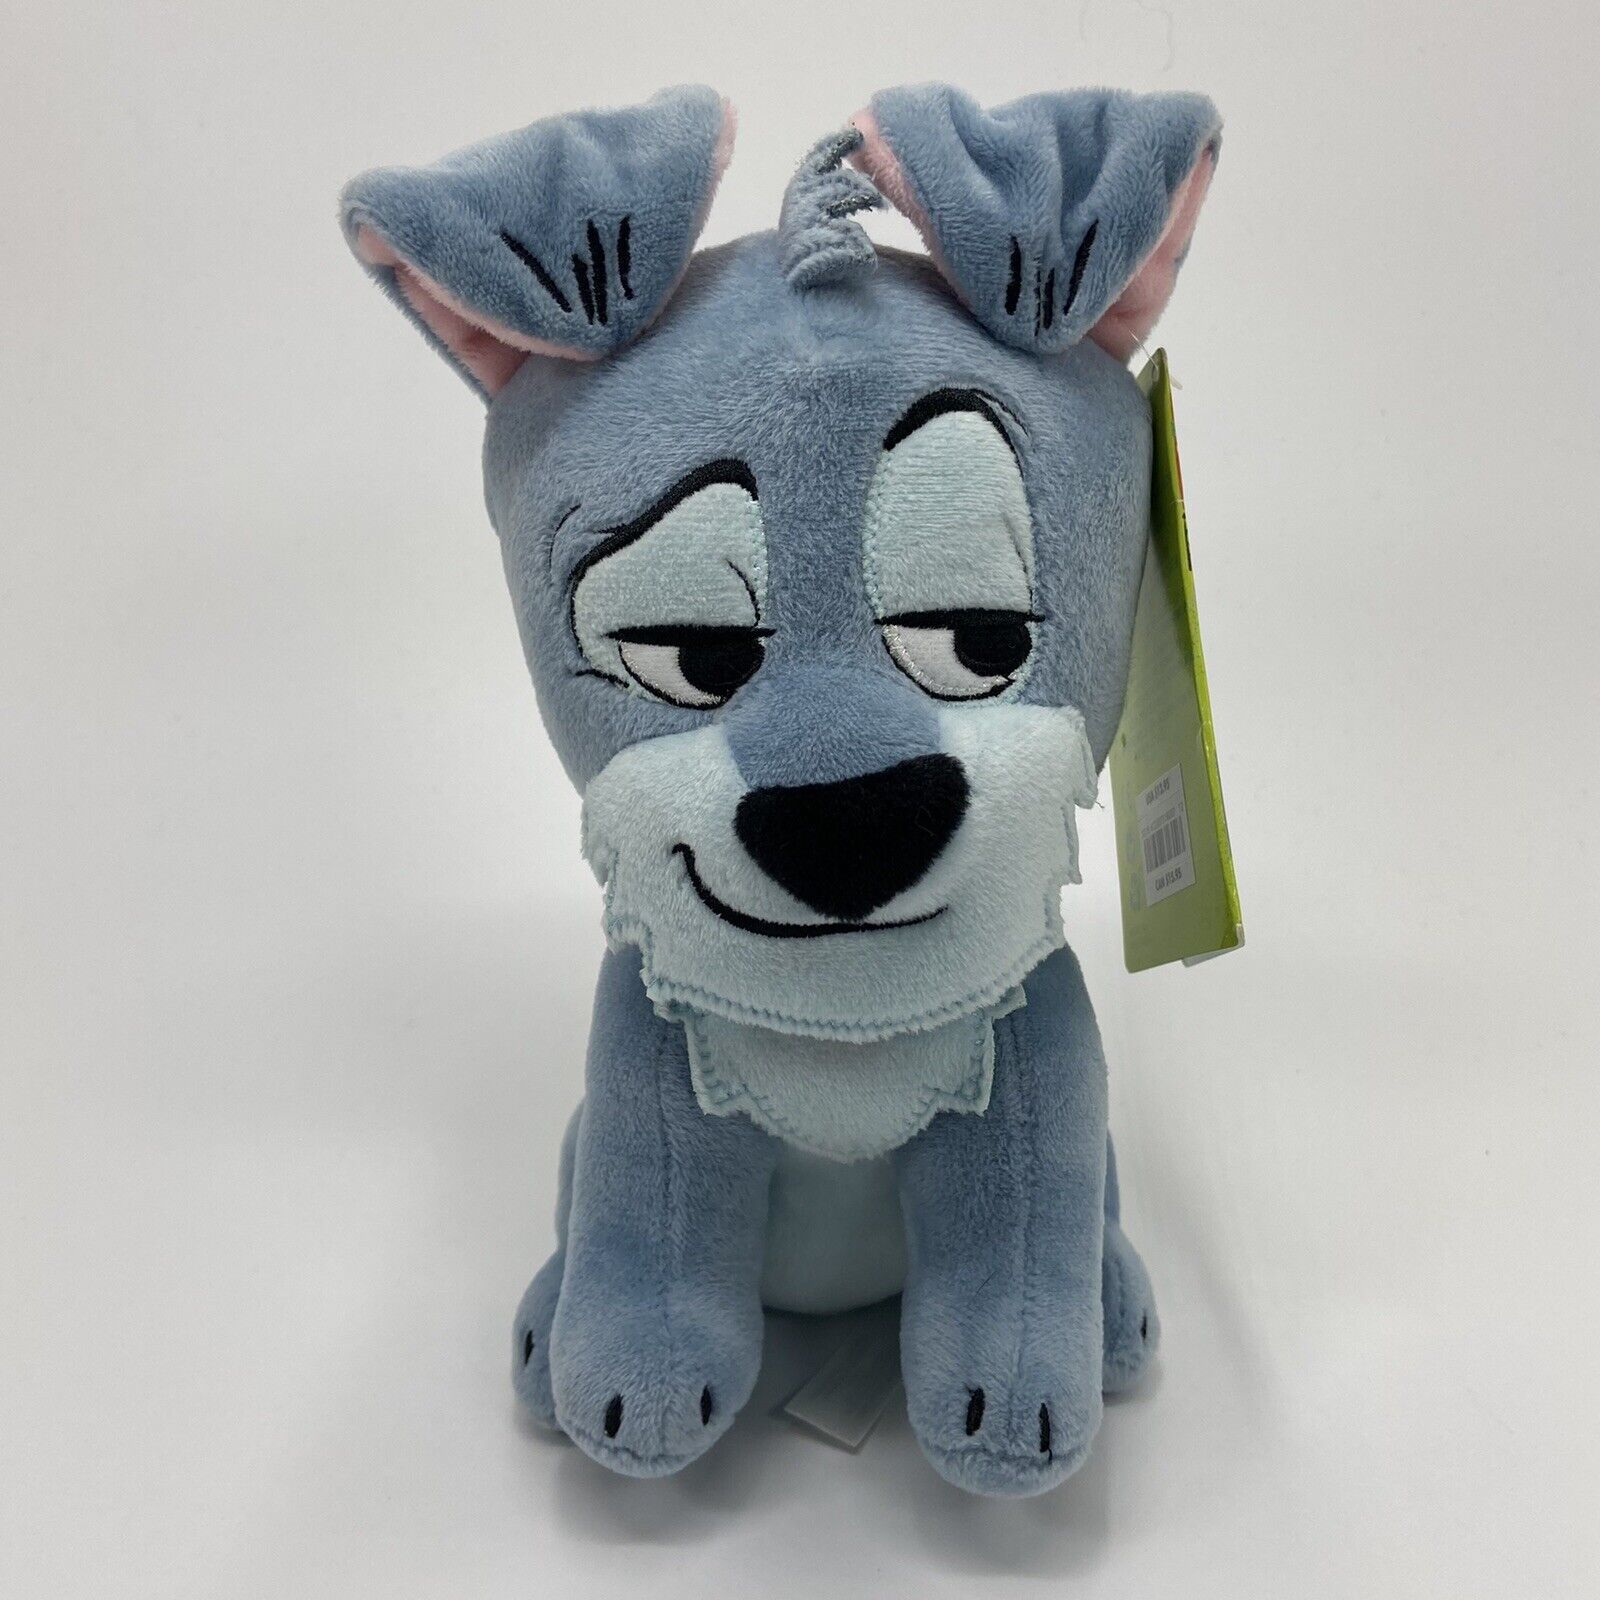 Disney Store Furrytale Friends Tramp 9” Plush From Lady and the Tramp New w/ Tag